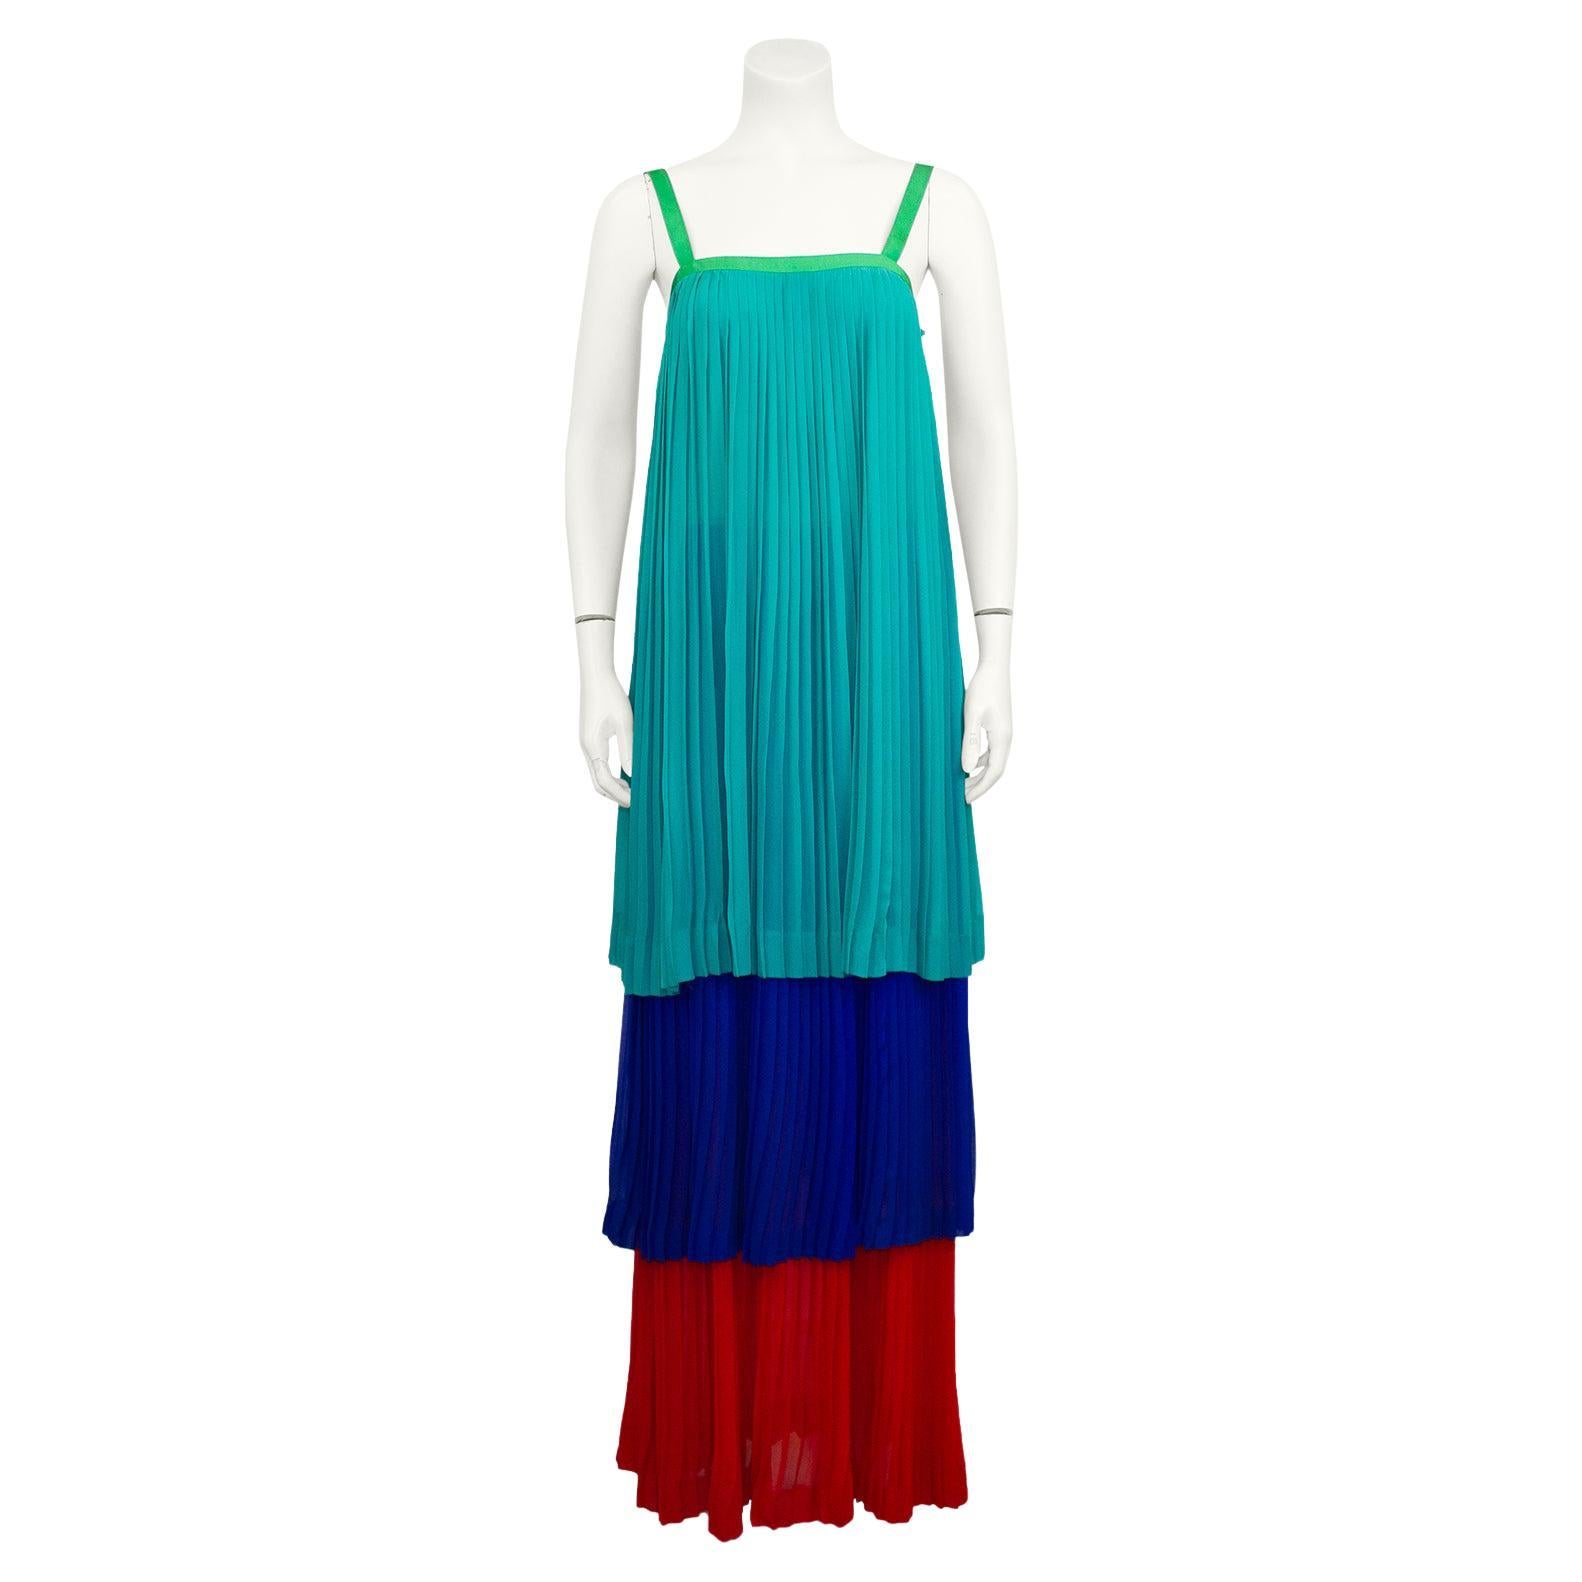 1978 Yves Saint Laurent Rive Gauche Pleated Tricolor Tiered Chiffon Gown